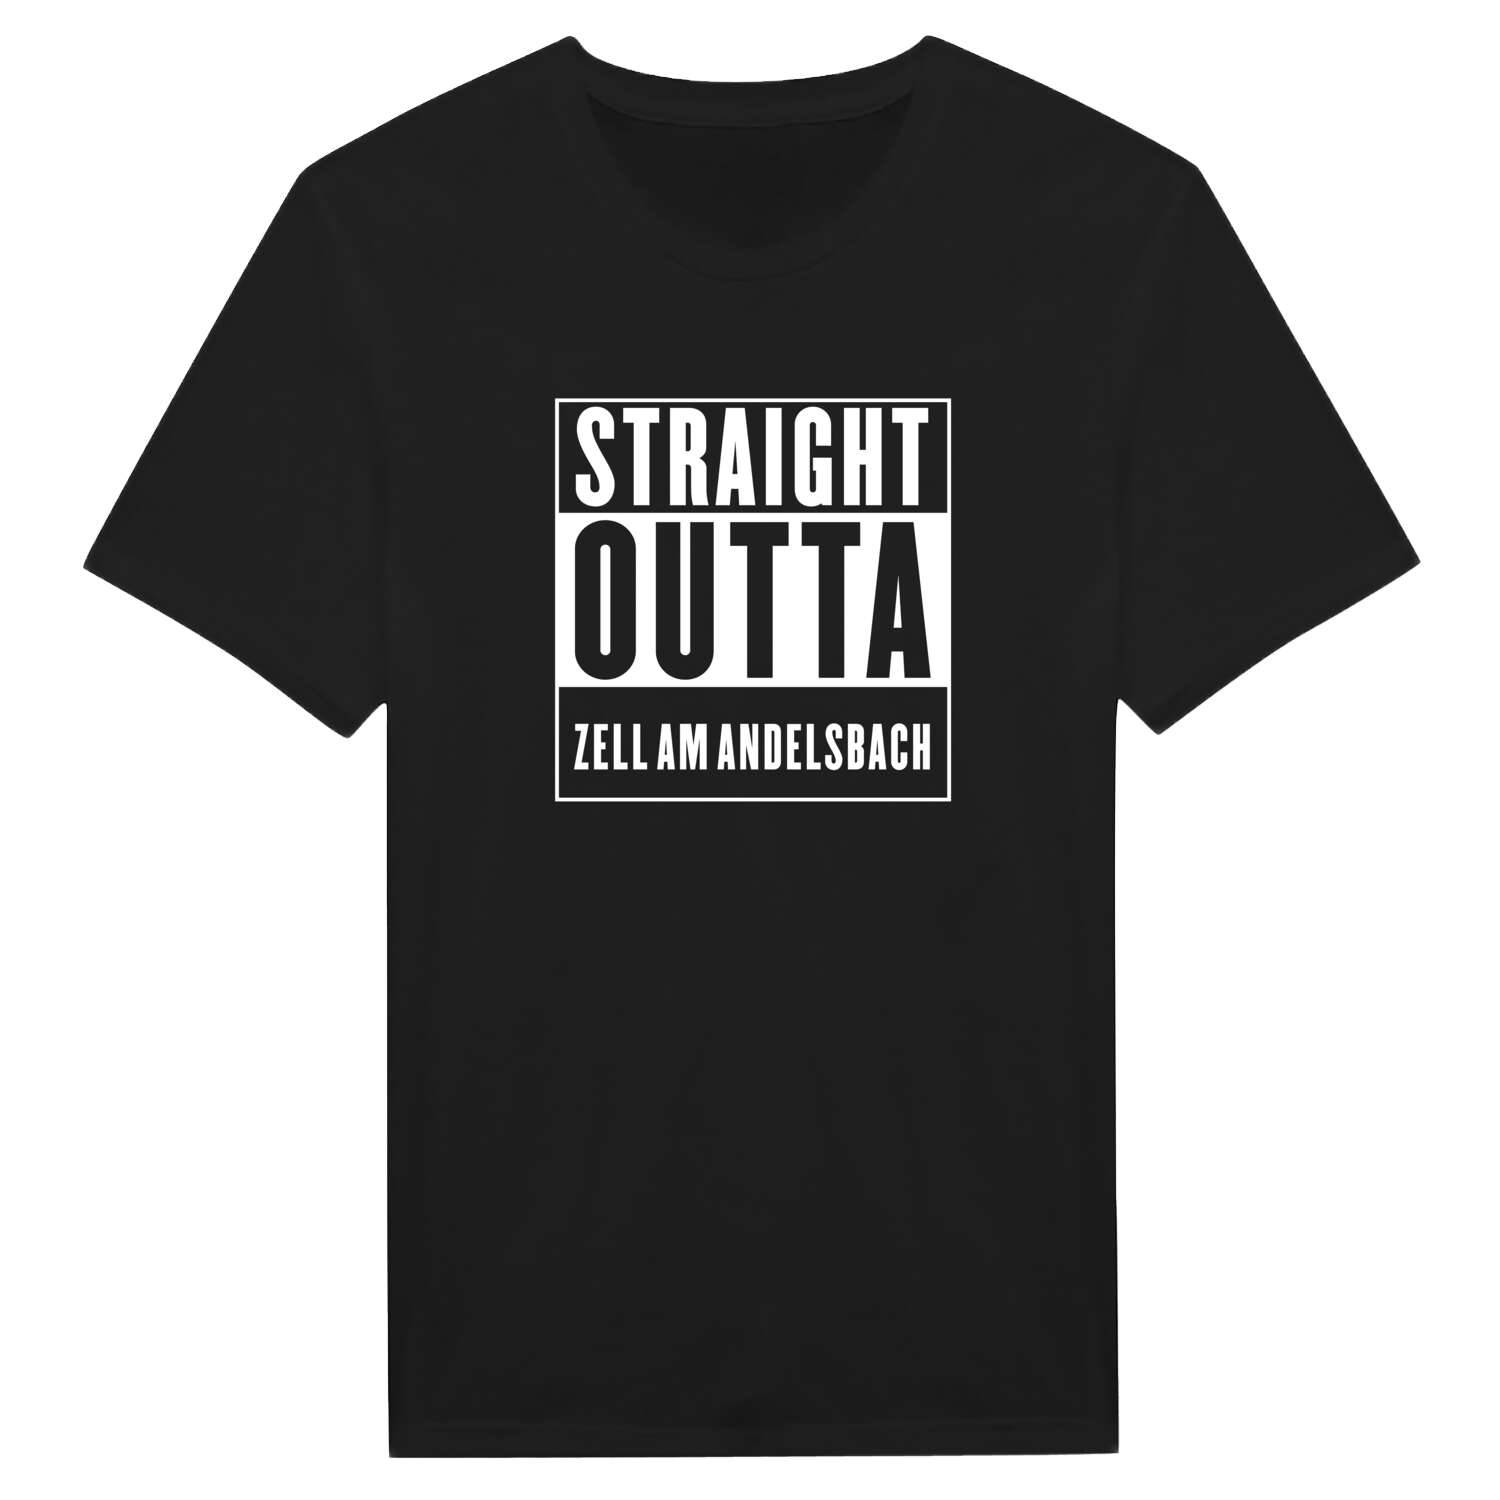 Zell am Andelsbach T-Shirt »Straight Outta«